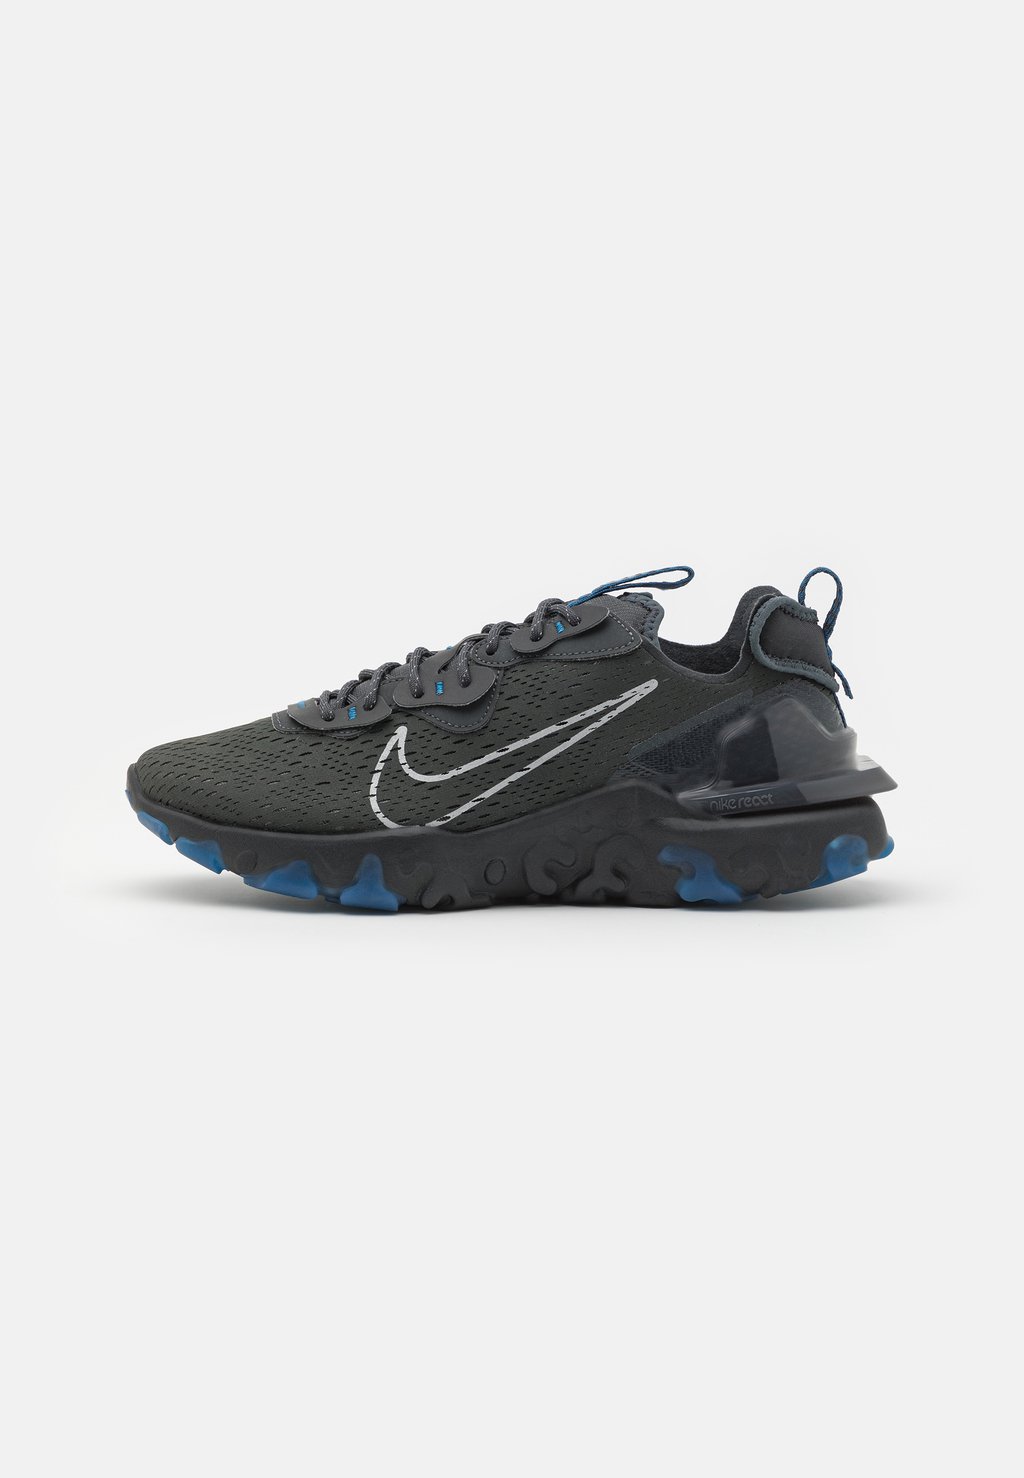 Кроссовки Nike REACT VISION UNISEX, цвет anthracite/reflect silver/industrial blue